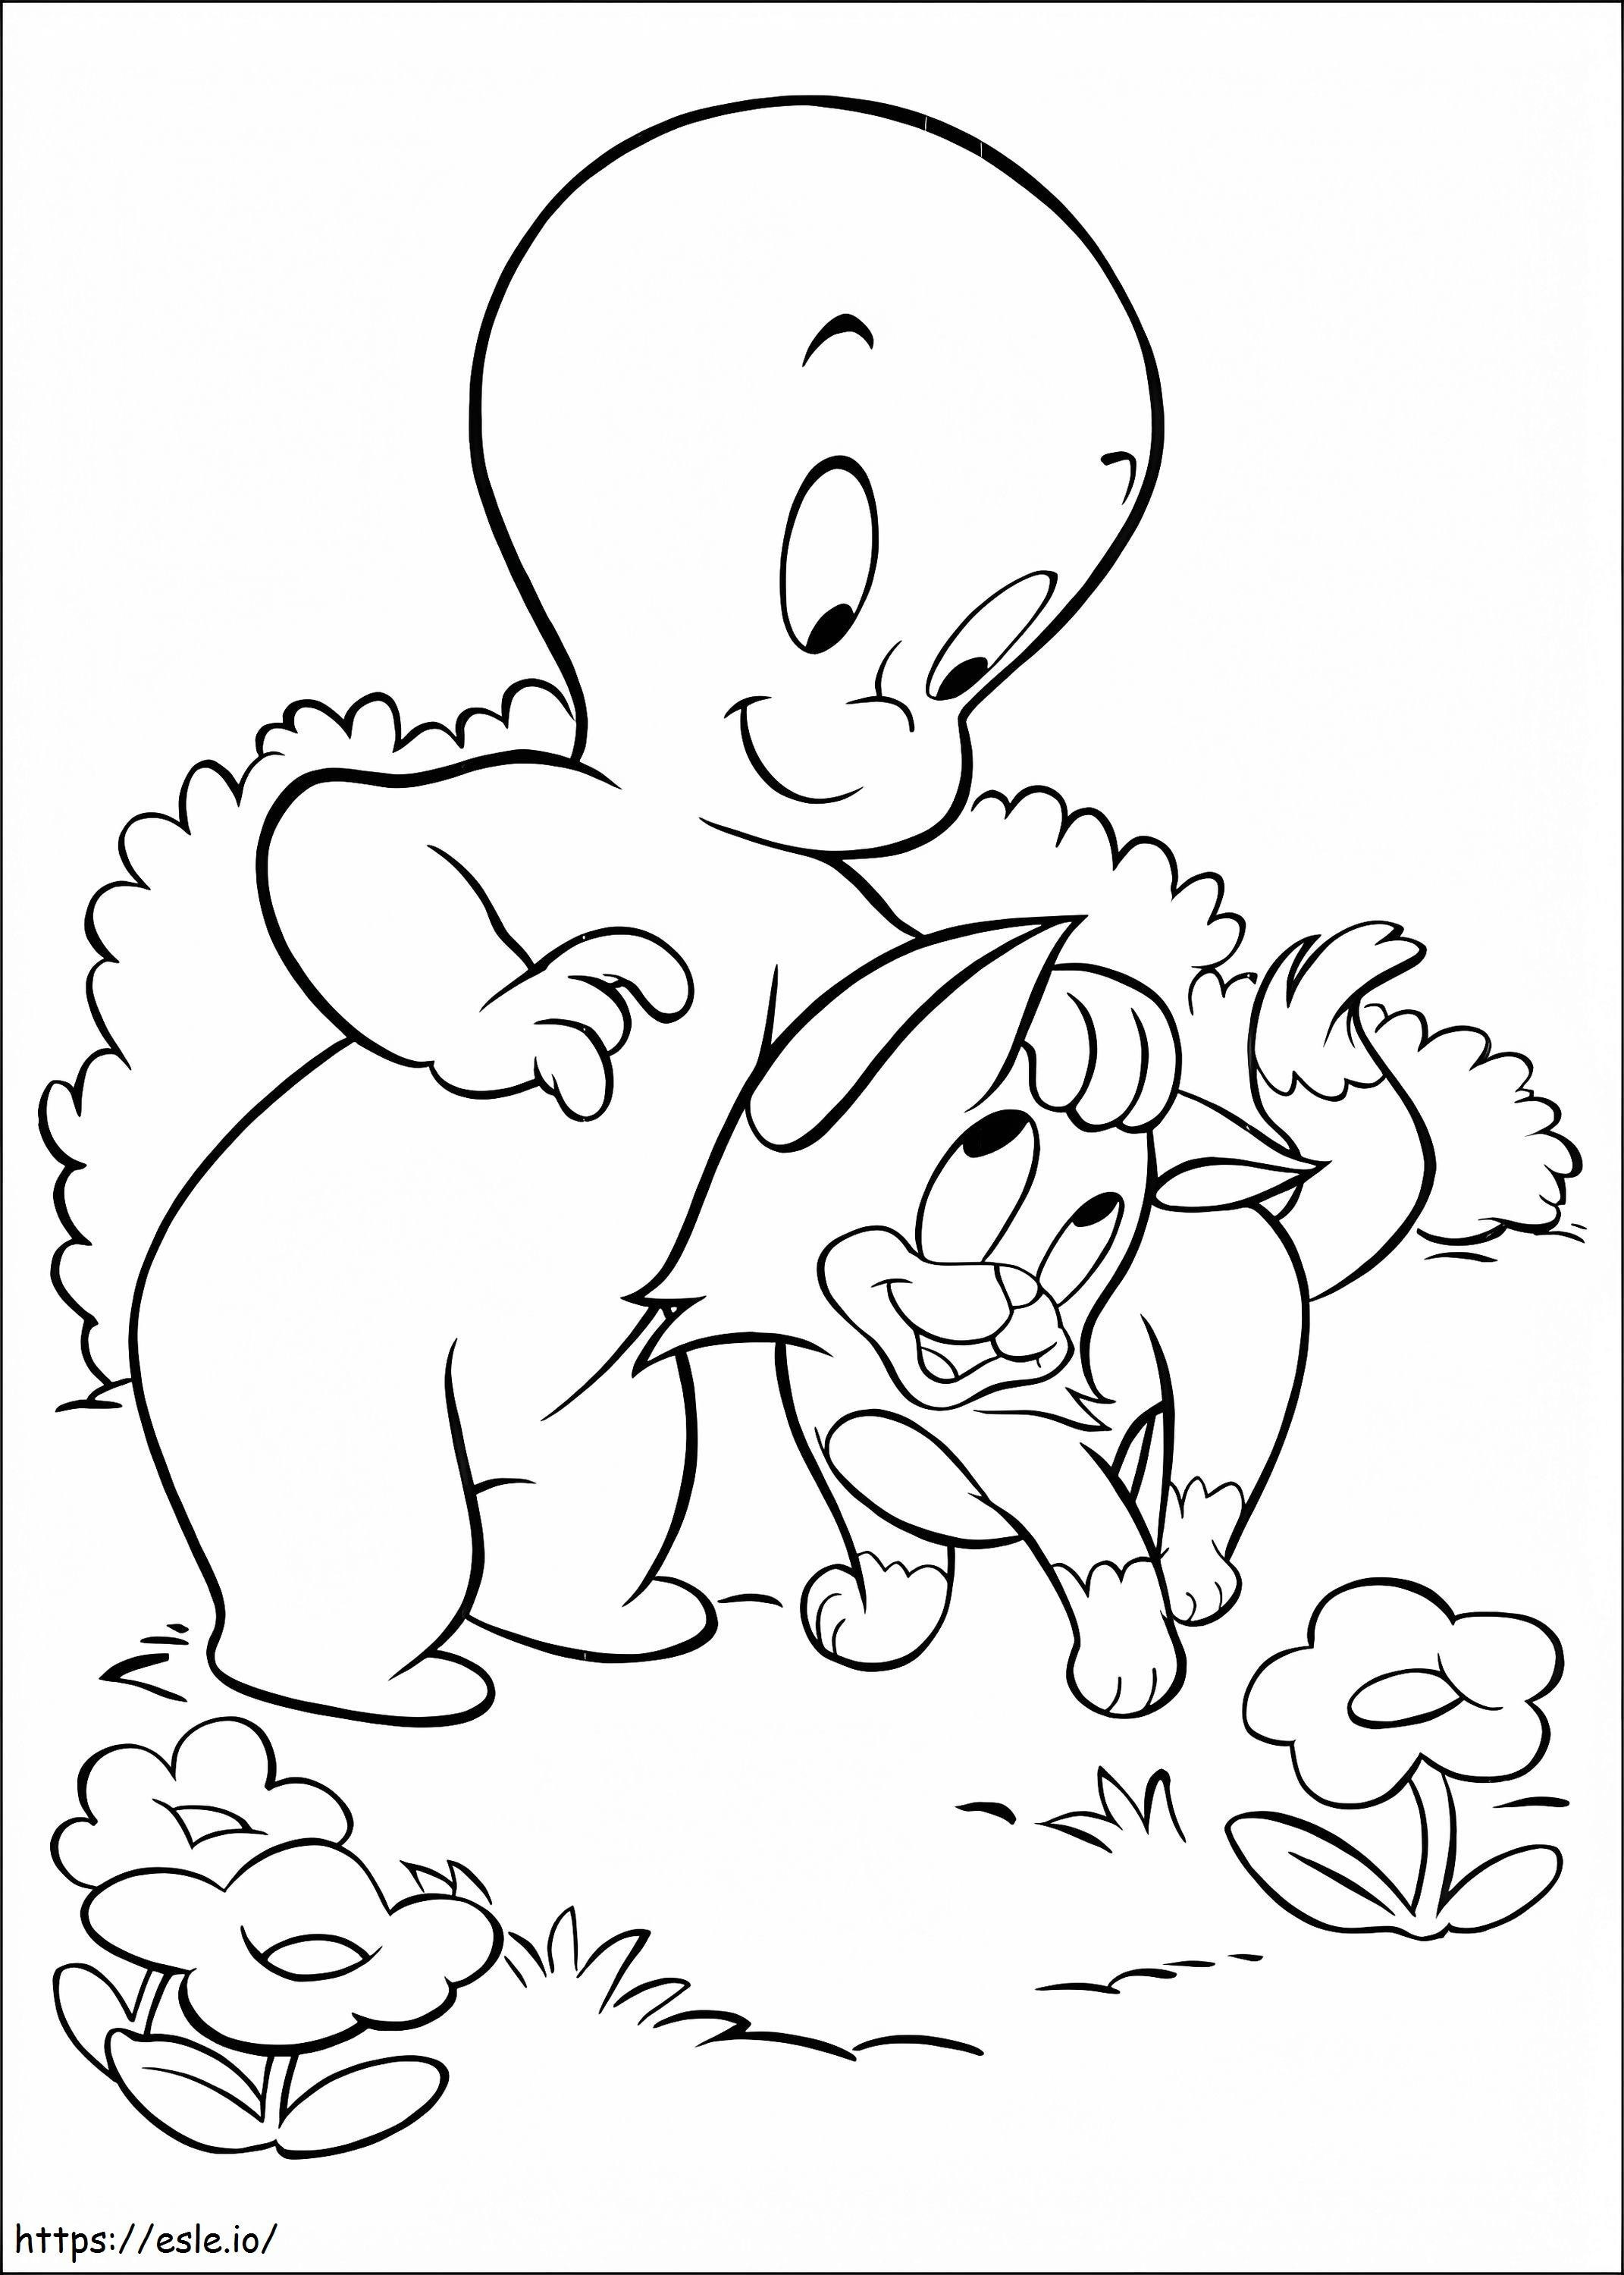 1534388290 Casper And Cat A4 coloring page